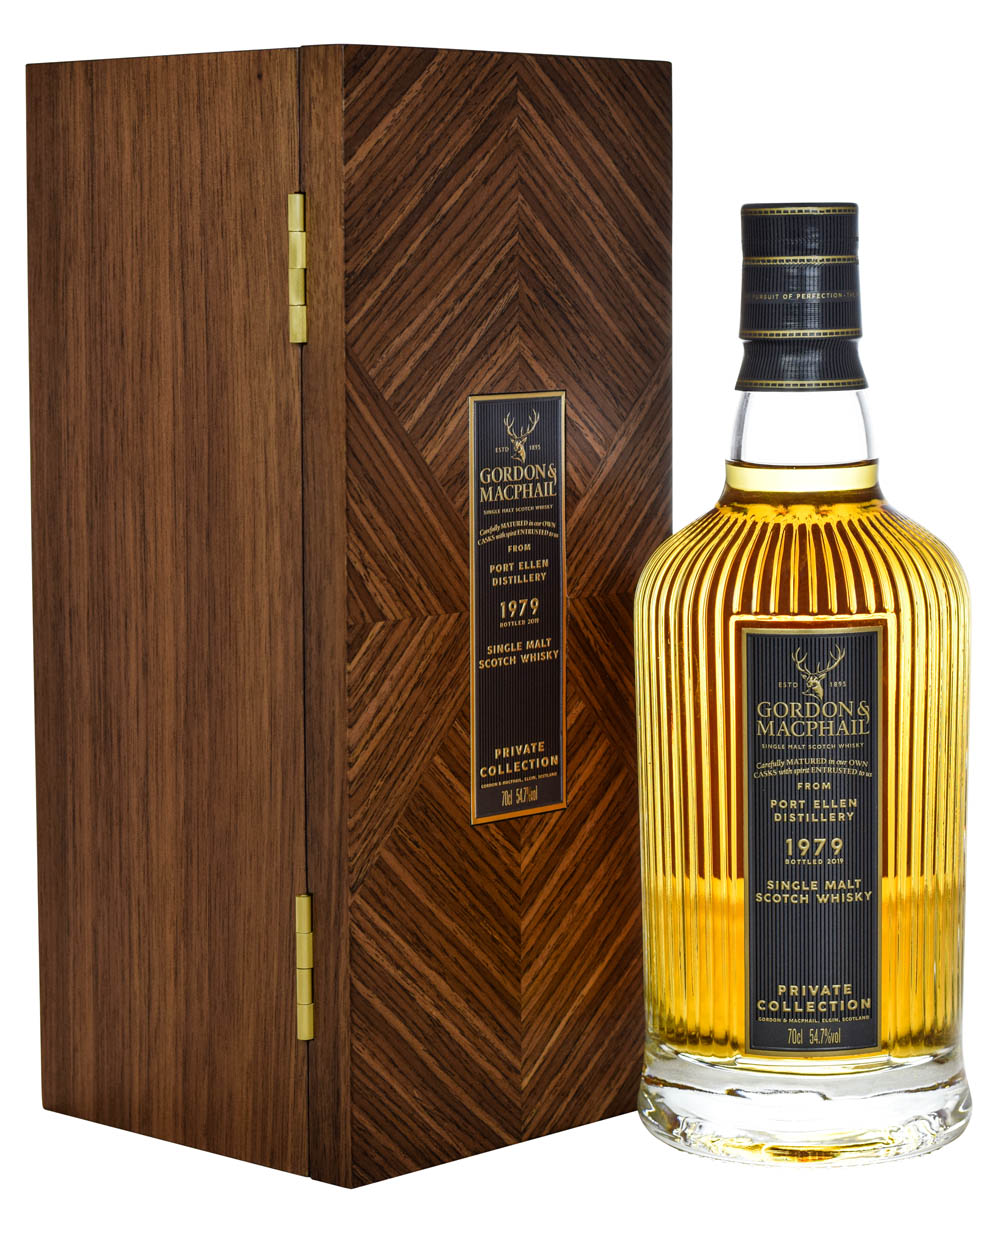 Port Ellen 1979 G&M Private Collection 40 Years Old Box Musthave Malts MHM